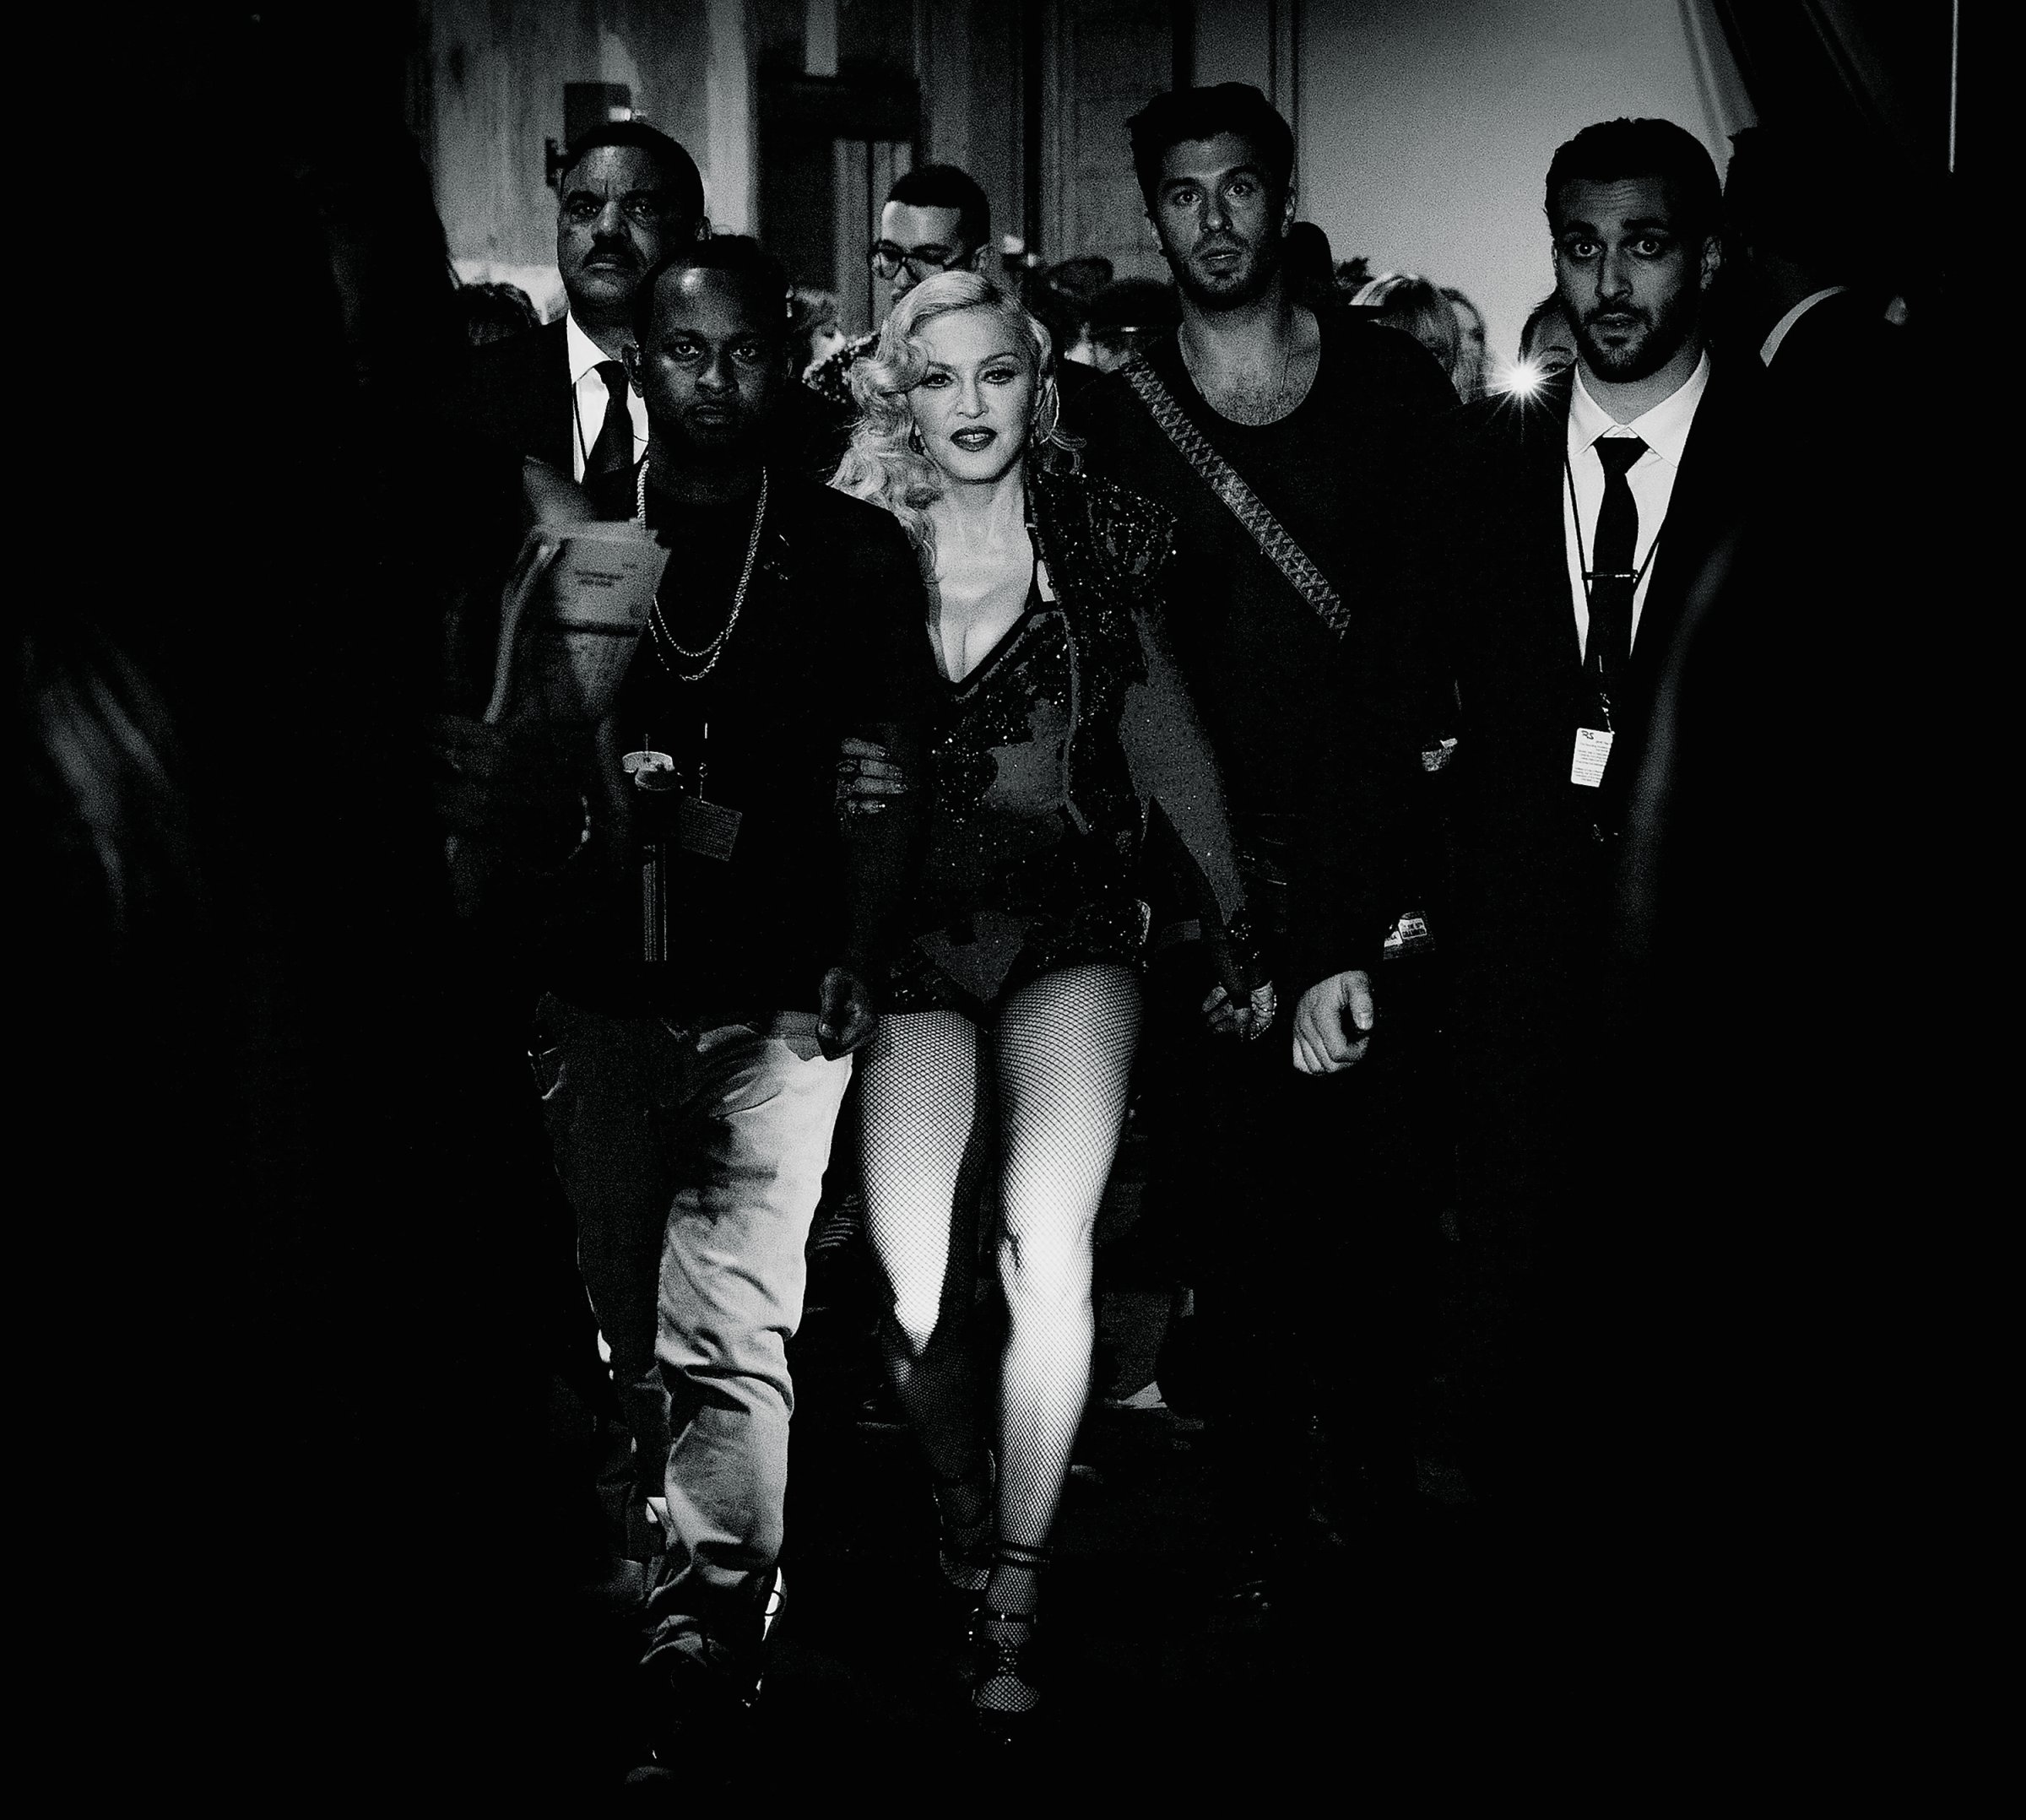 Hitting her stride: Madonna backstage at the 57th annual Grammy Awards on Feb. 8